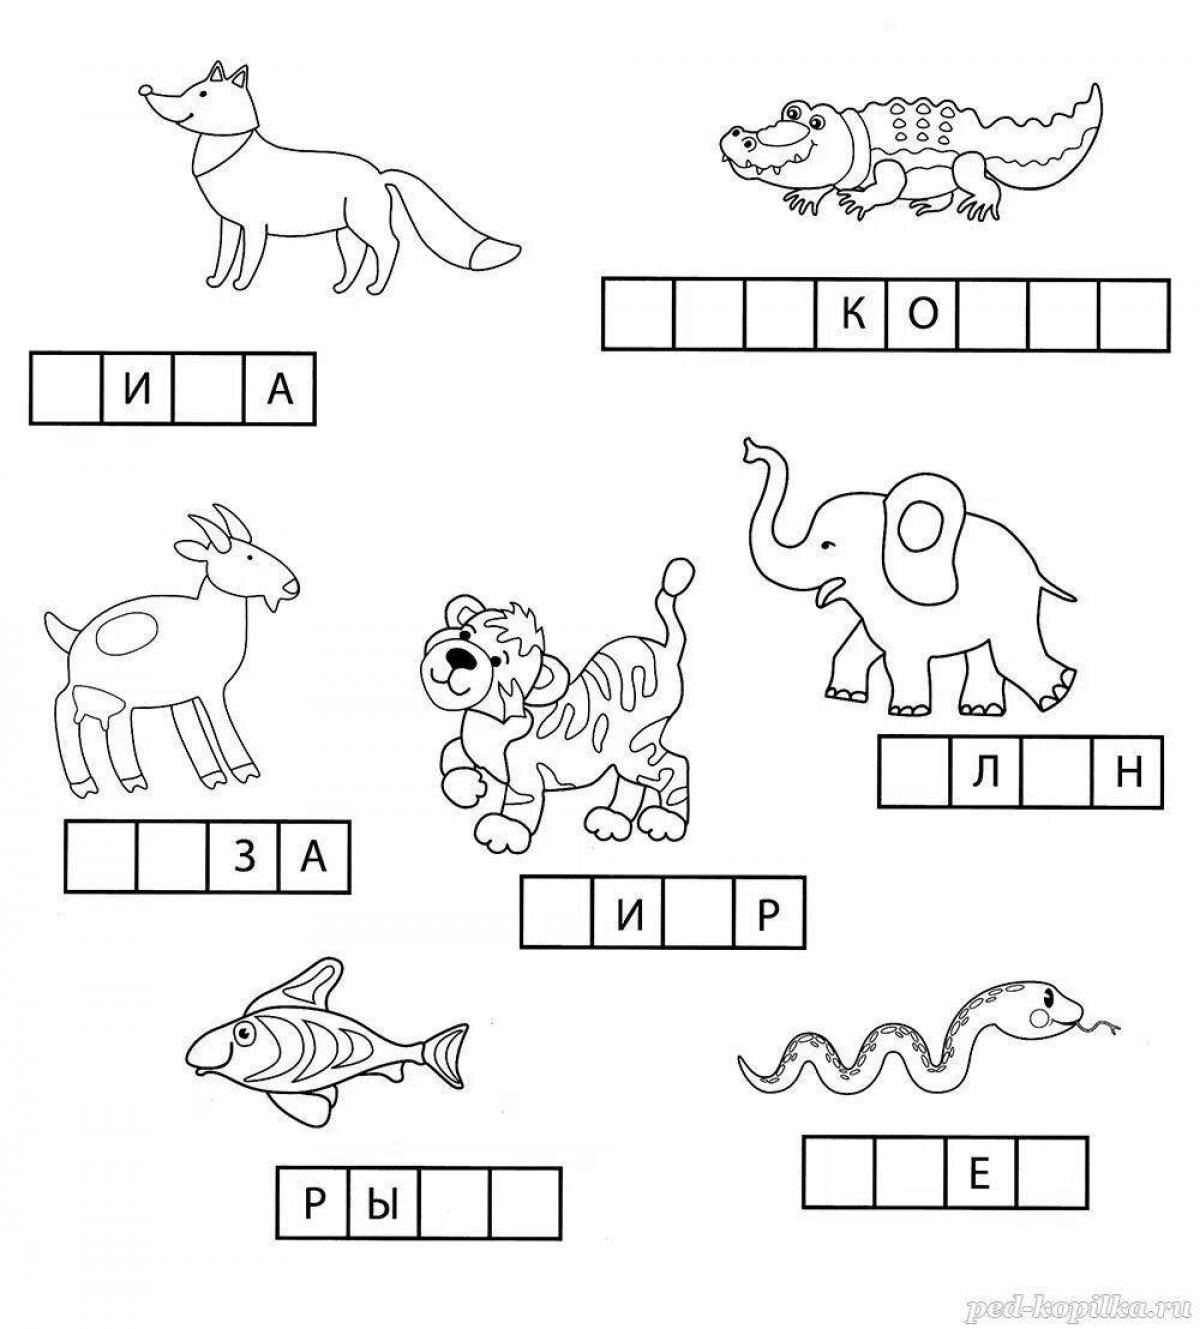 Colored plosive syllables coloring pages for kids